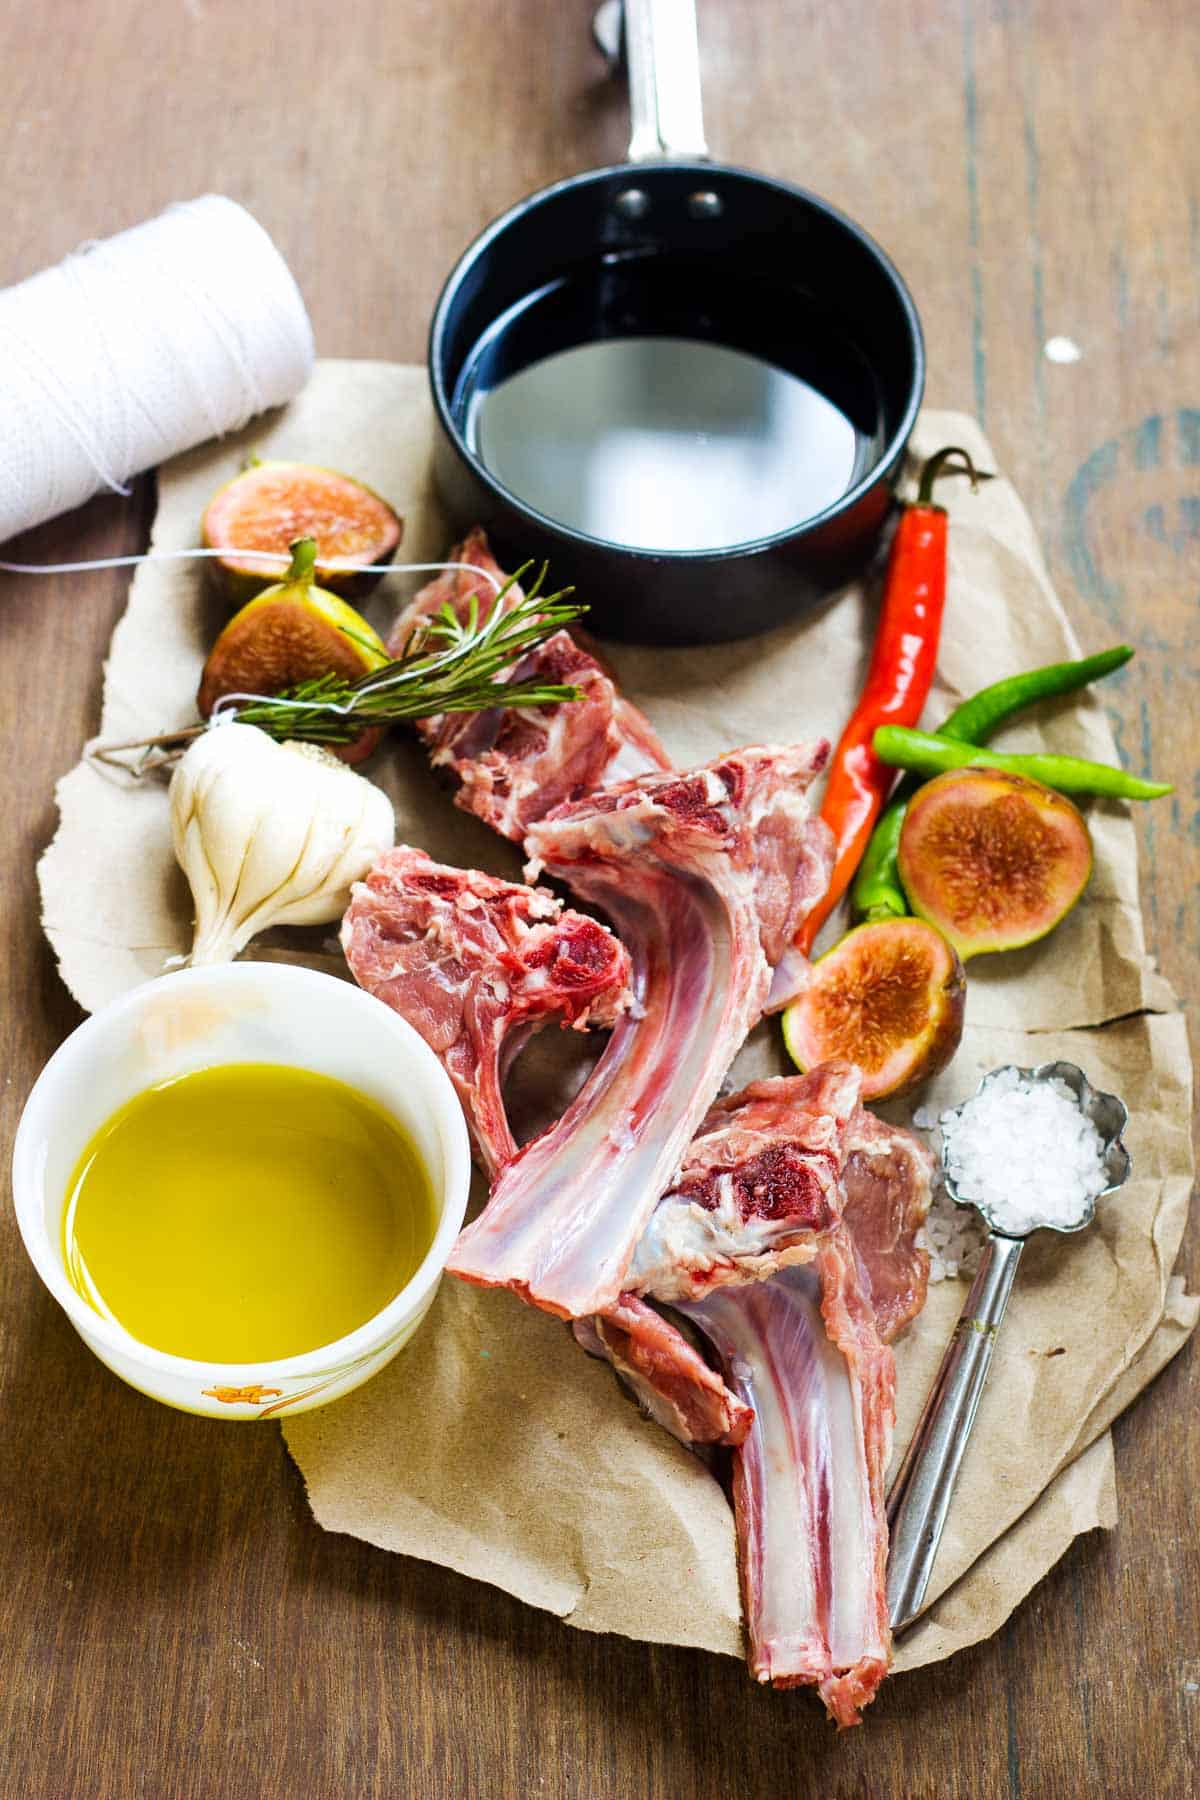 The ingredients required to make spiced lamb chops with figs and balsamic reduction.